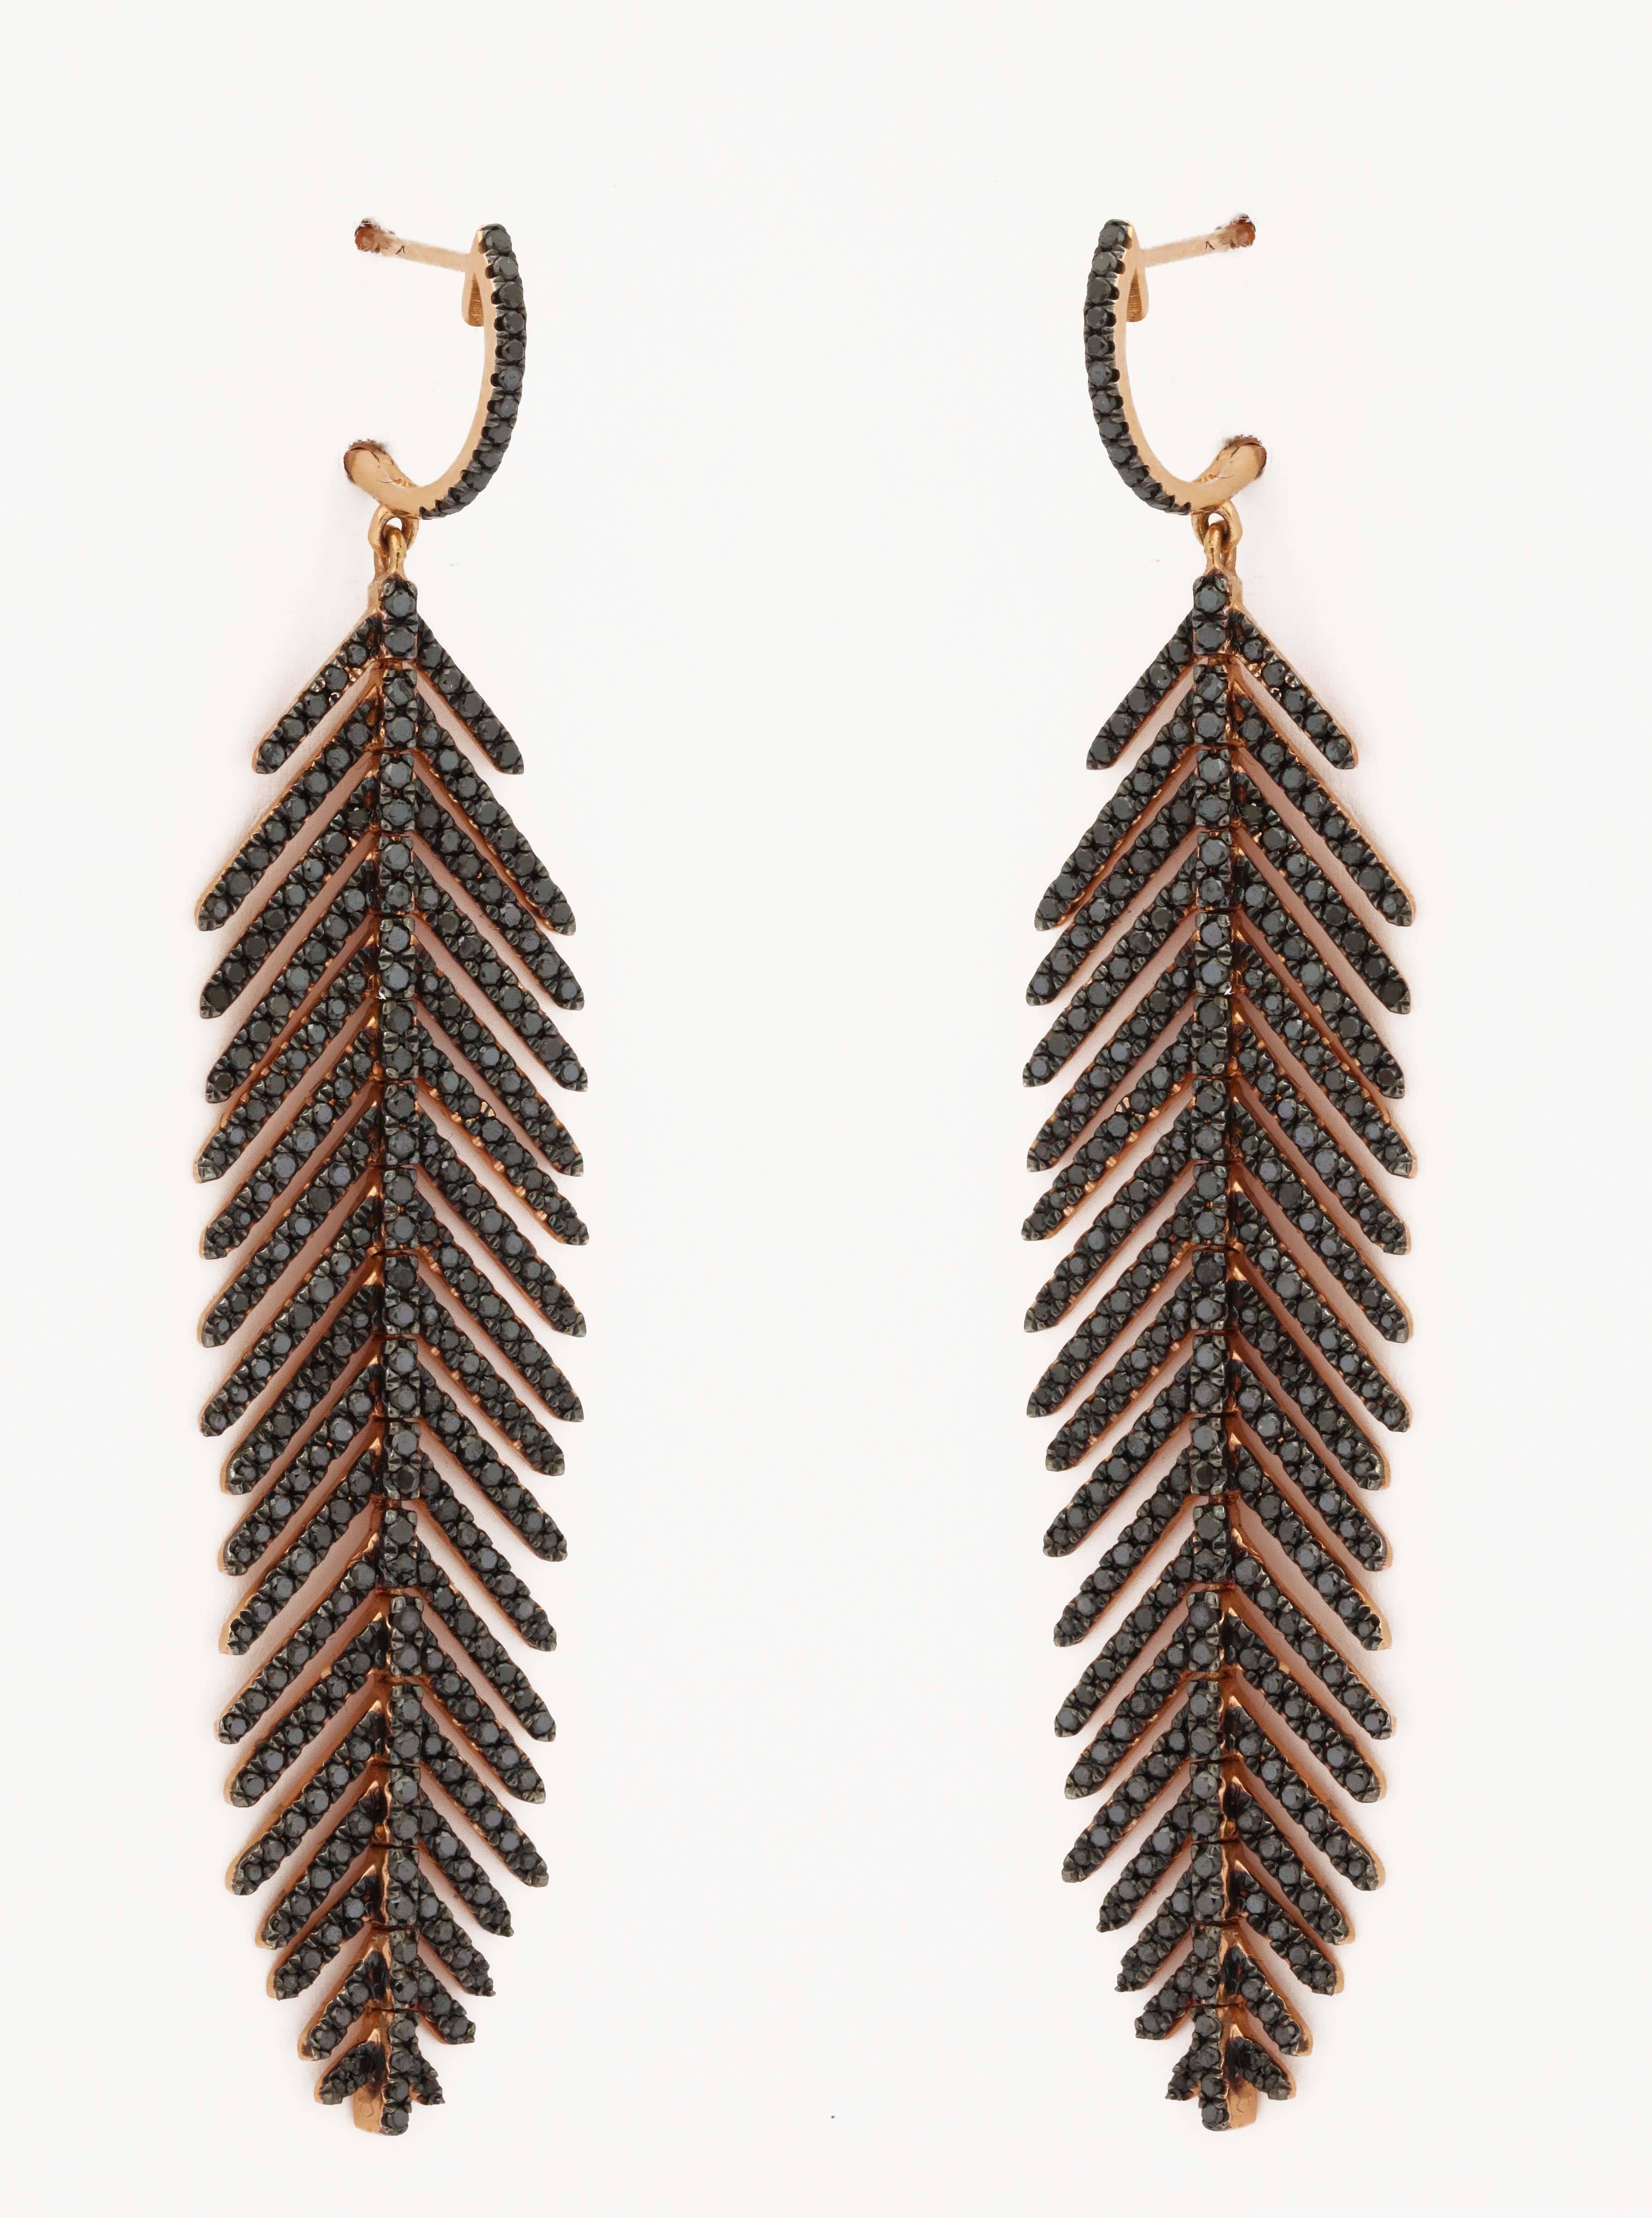 these elegant 18k rose gold and black diamond feather earrings contain
562 round black diamonds 3.25 carats and have a total weight of 
15.6 grams each
